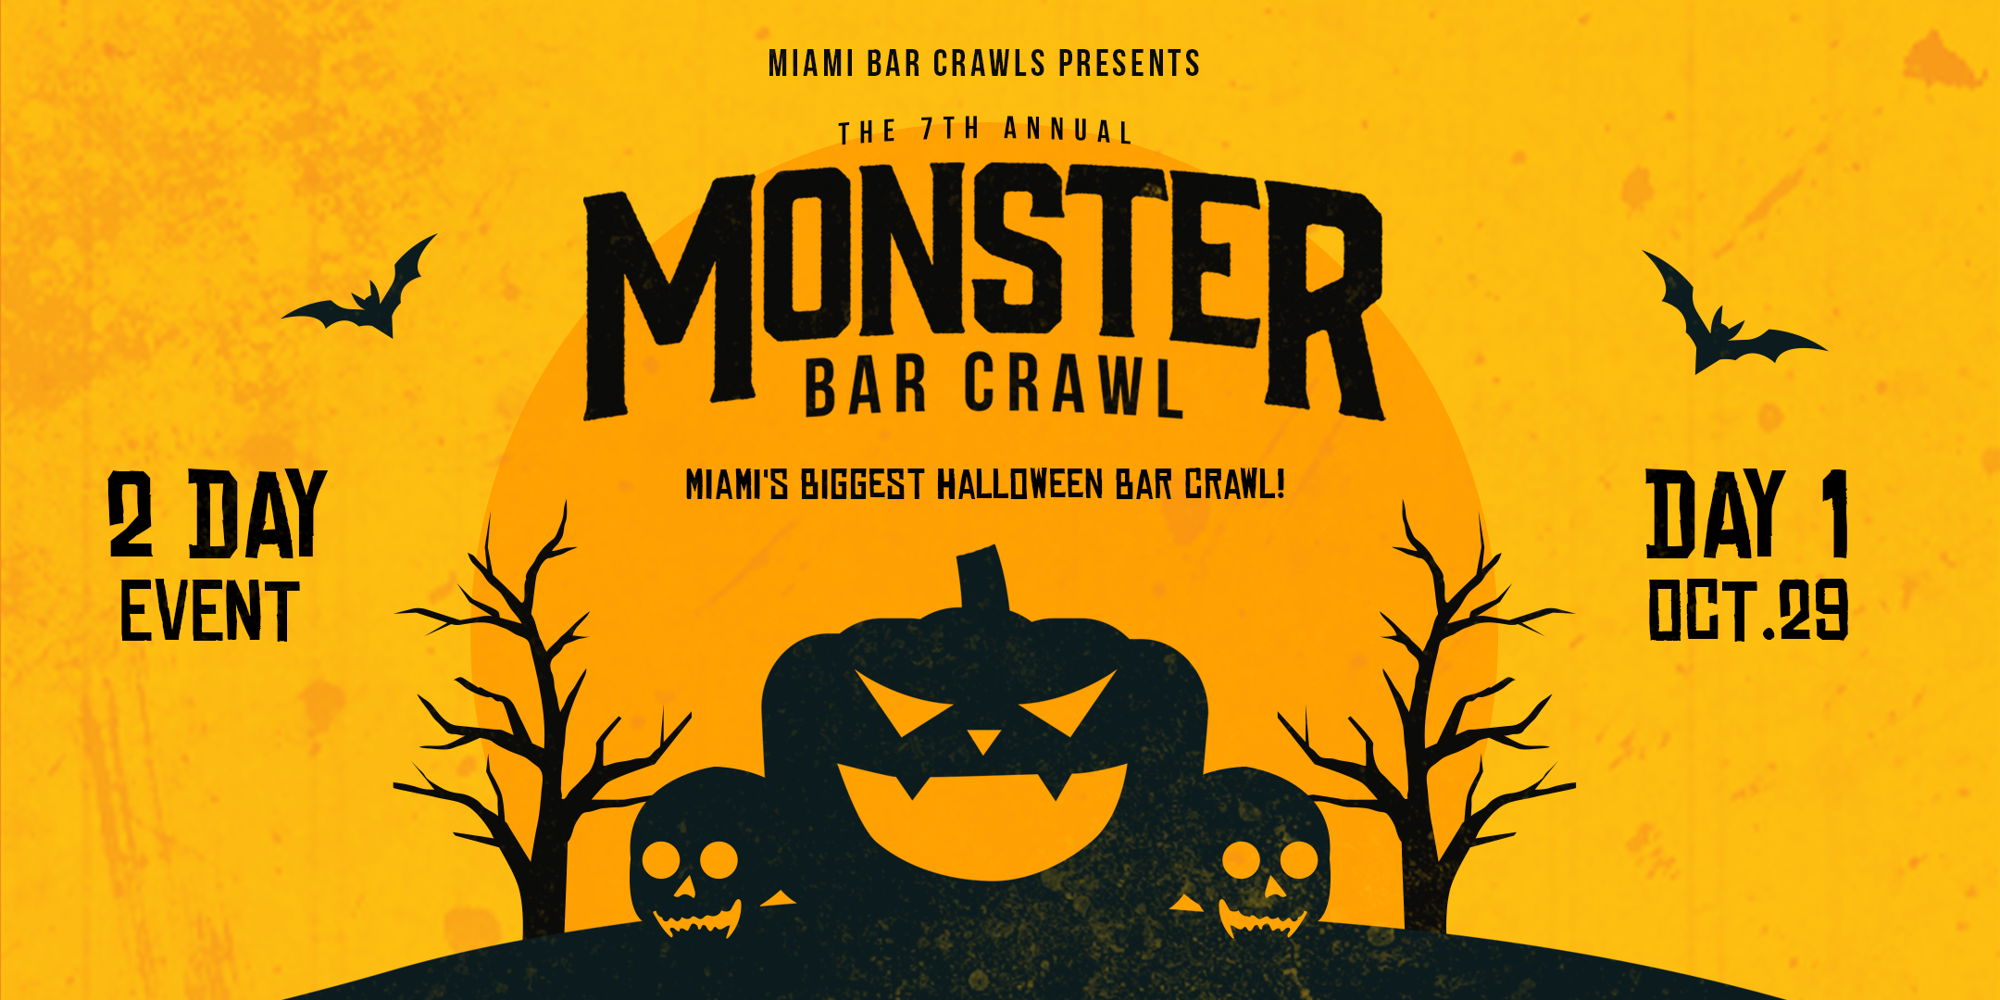 Miami Bar Crawls wants you to join thousands of crawlers for DAY ONE of our 7th Annual Monster Bar Crawl! promotional image